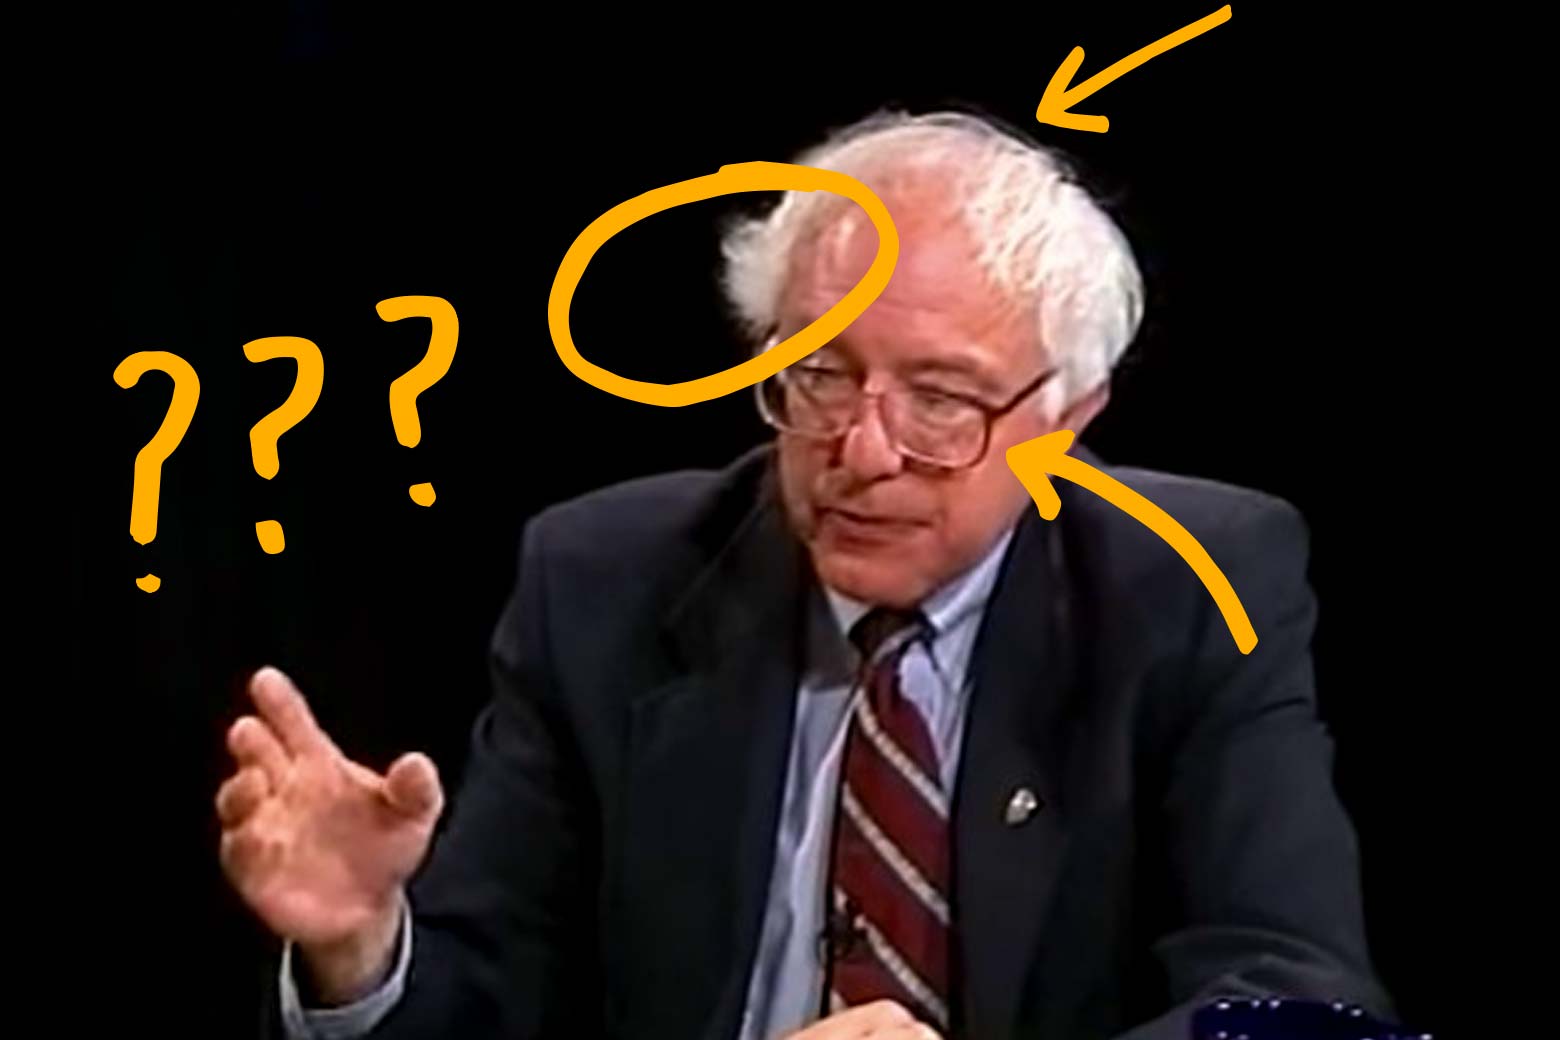 Screenshot from video of Bernie Sanders speaking, annotated with question marks and arrows.